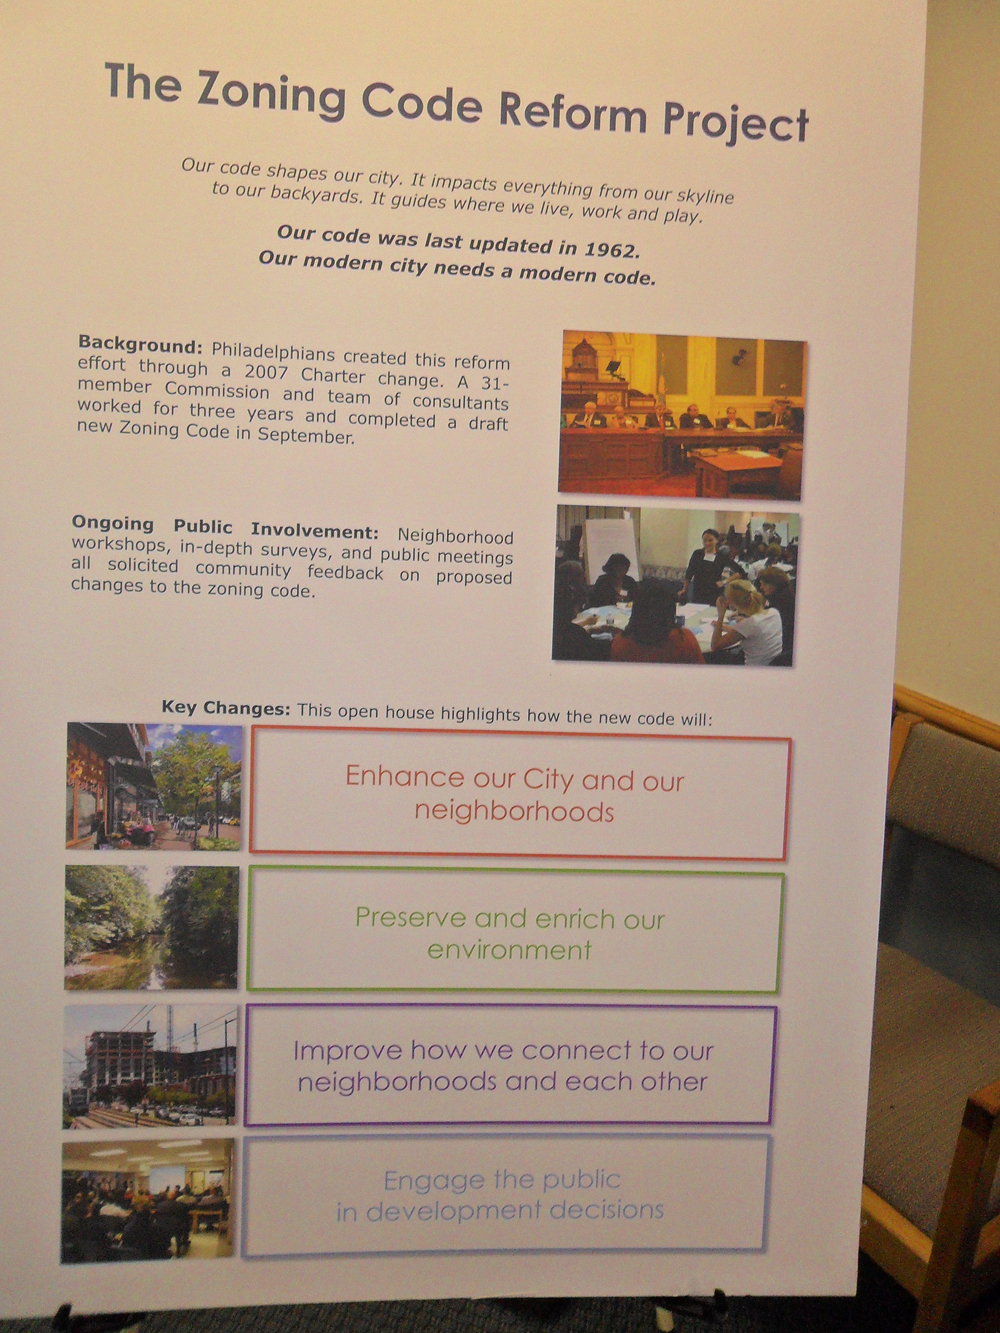 The four proposed key changes to the zoning code are displayed for open house attendees.